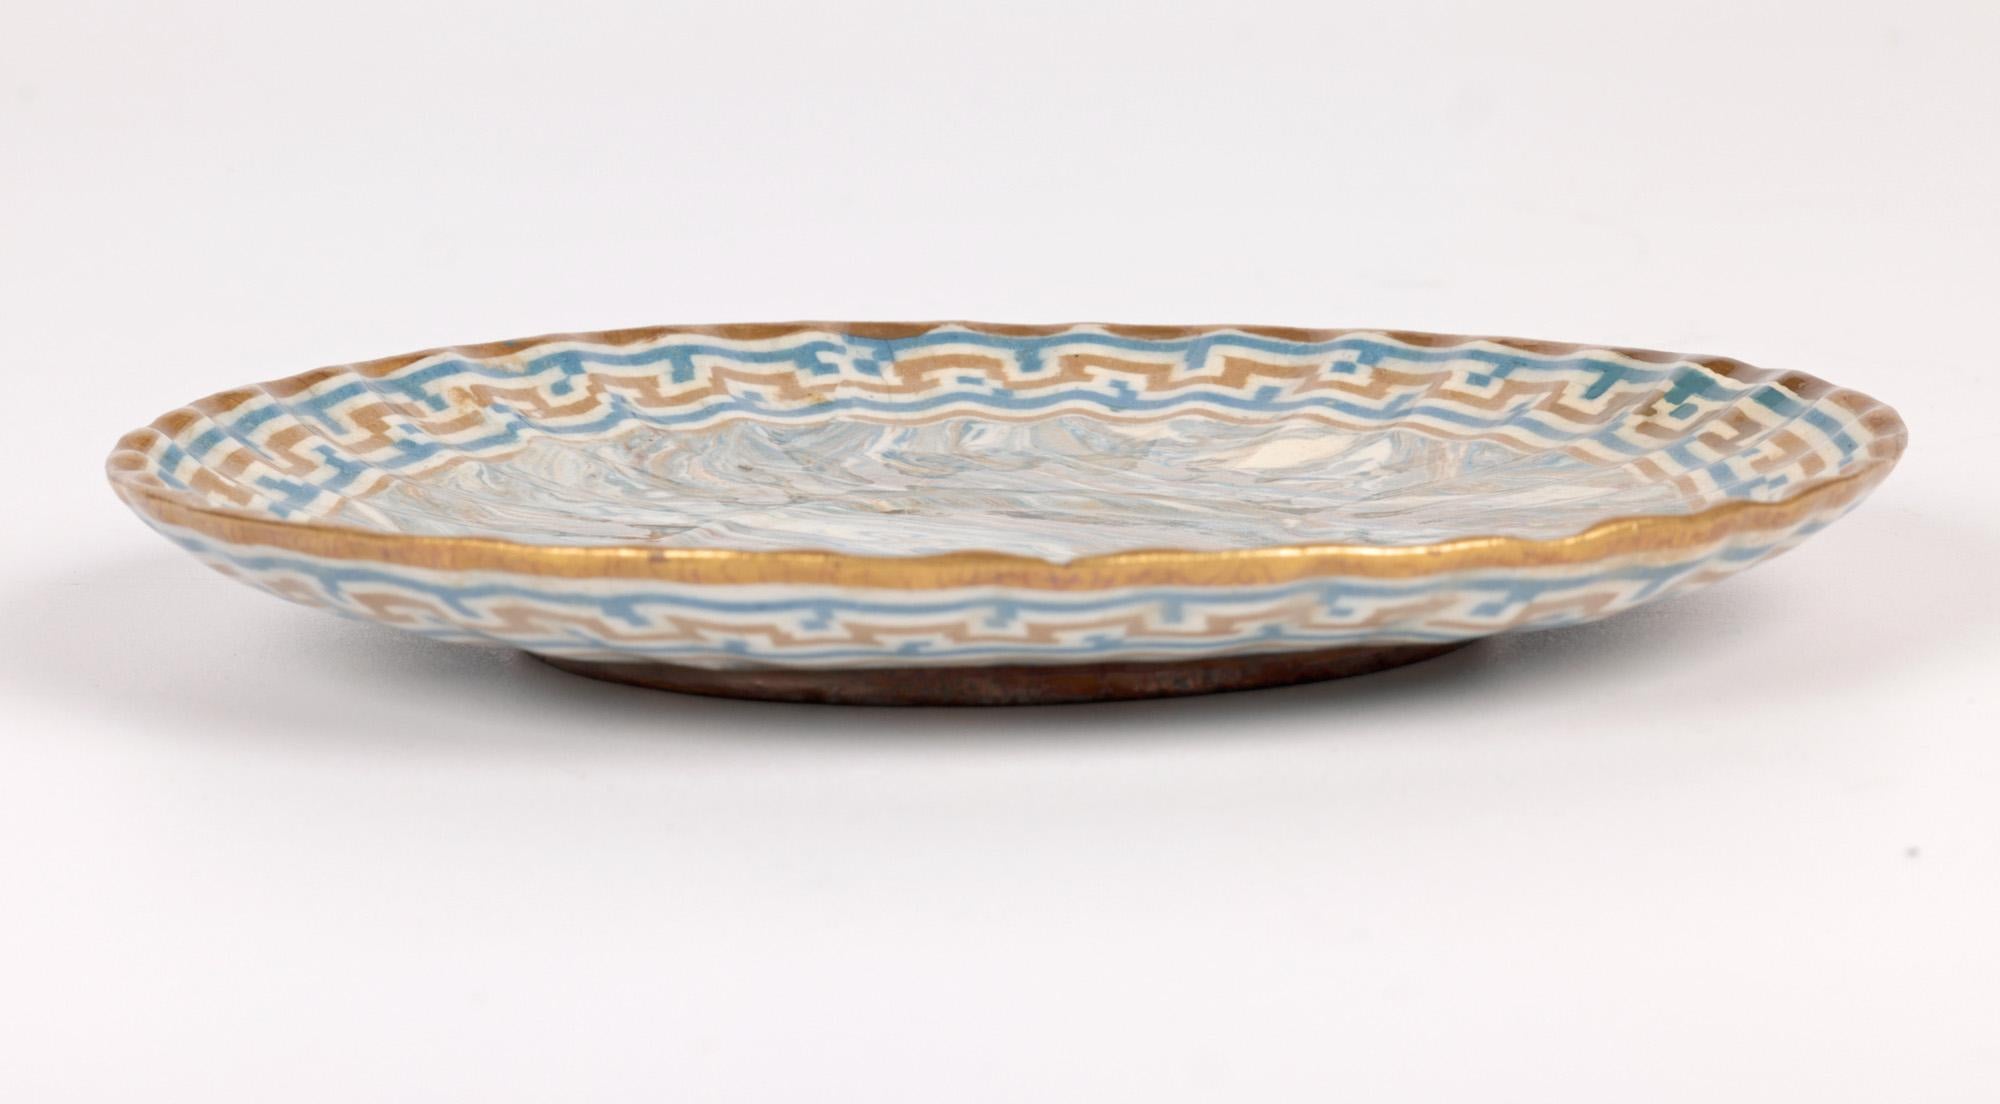 A very rare and stylish Doulton Lambeth Marqueterie Ware blue and brown marbled art pottery saucer with gilded designs by Lambeth’s first Art Director Wilton Parker Rix (Doulton Lambeth 1868-1897) and dating from around 1887. 
Rix became a trainee